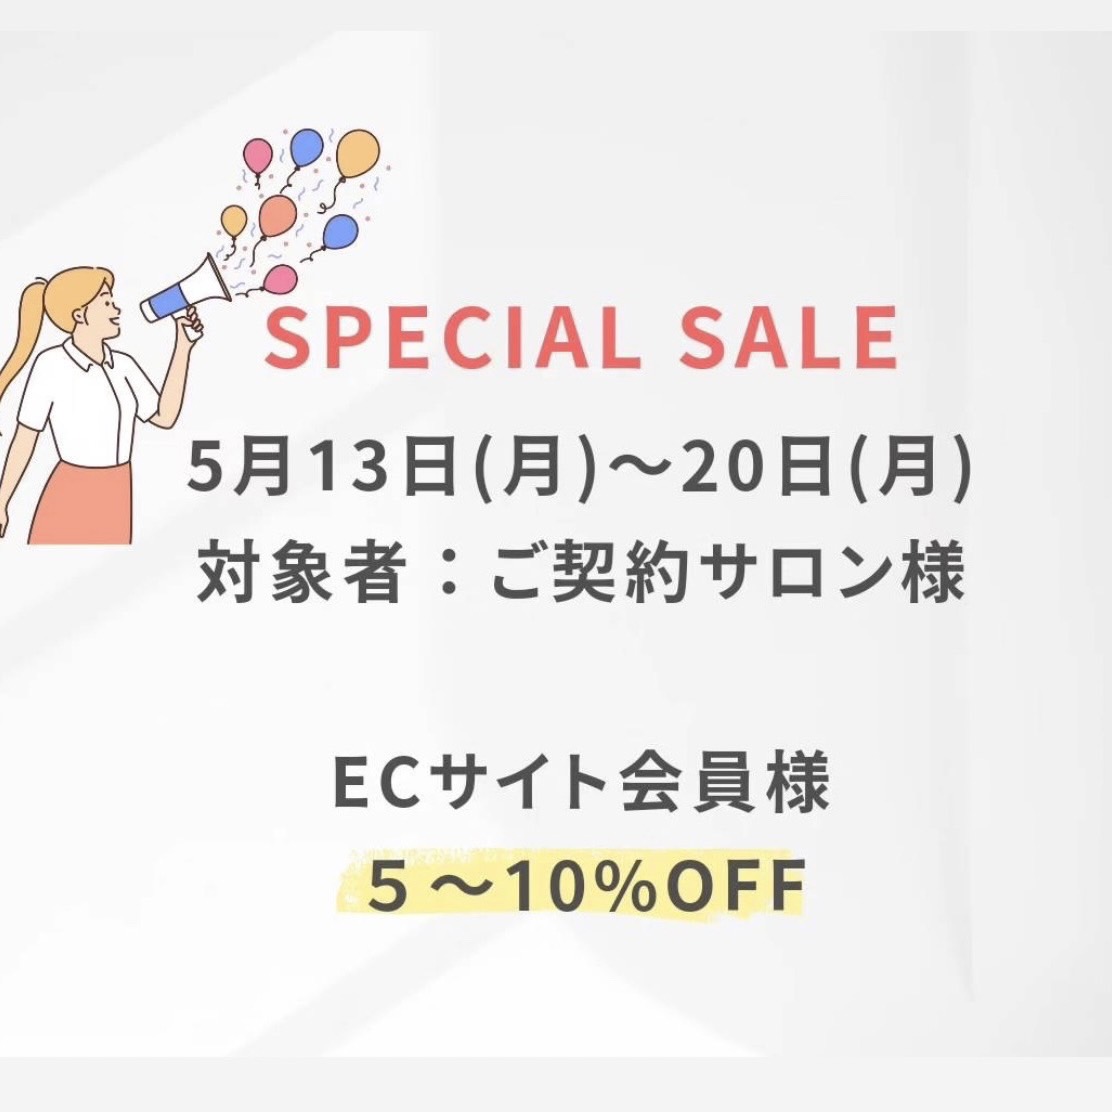 【SPECIAL SALE】BeautyworldJapan Tokyo  forves.様ブース出店記念